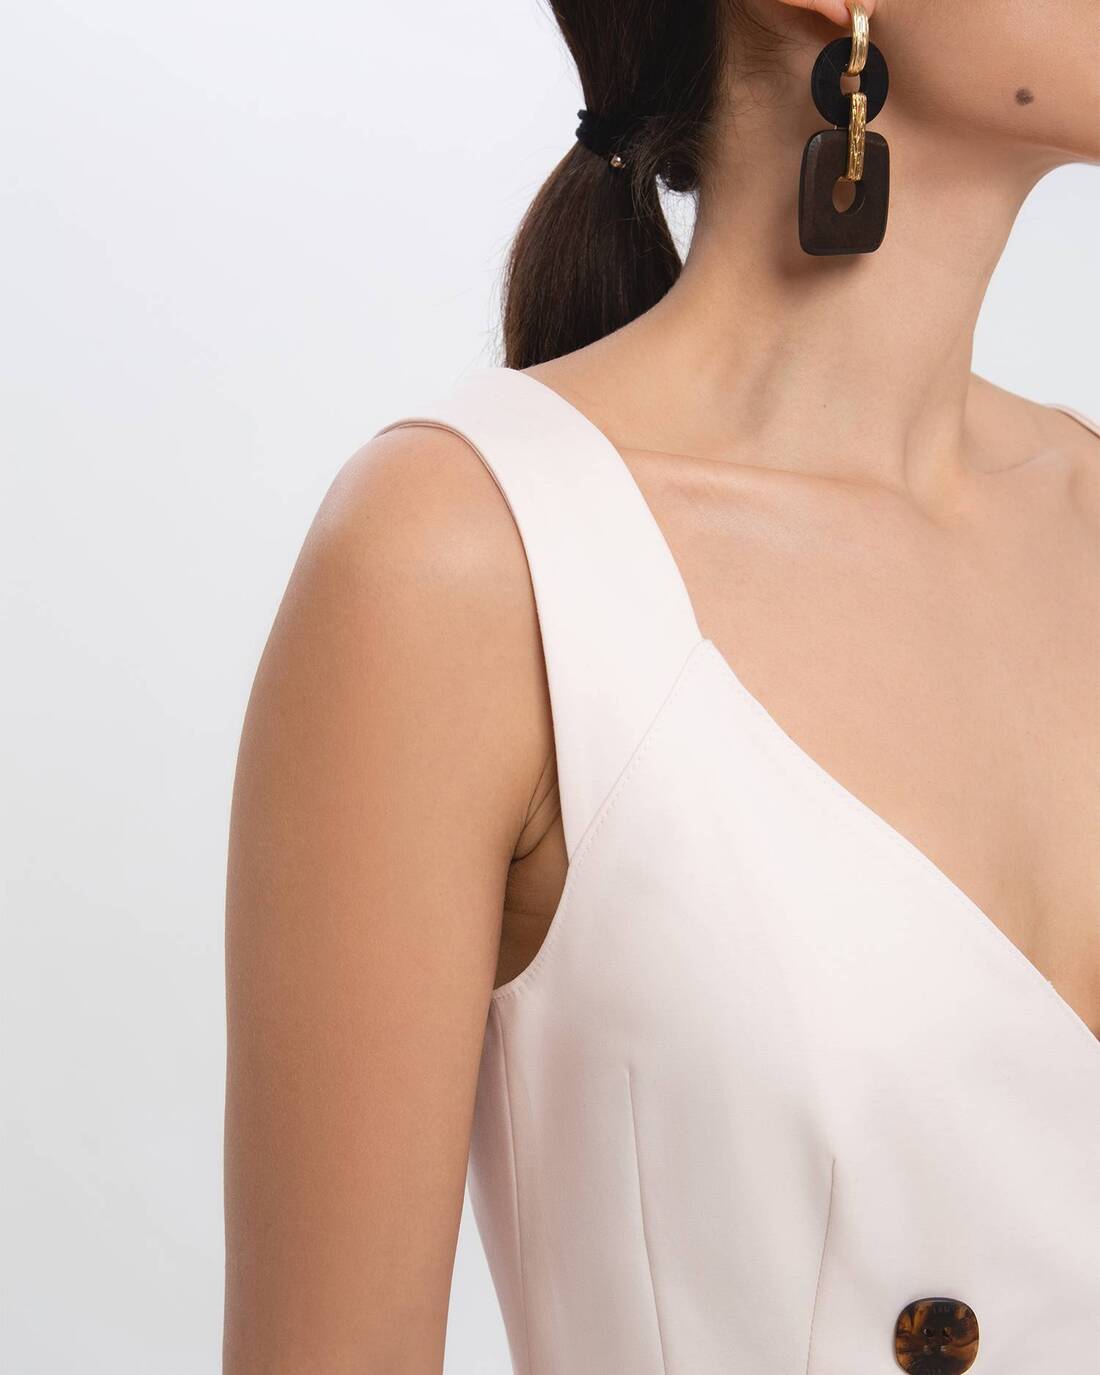 Double-breasted dress with triangular neckline